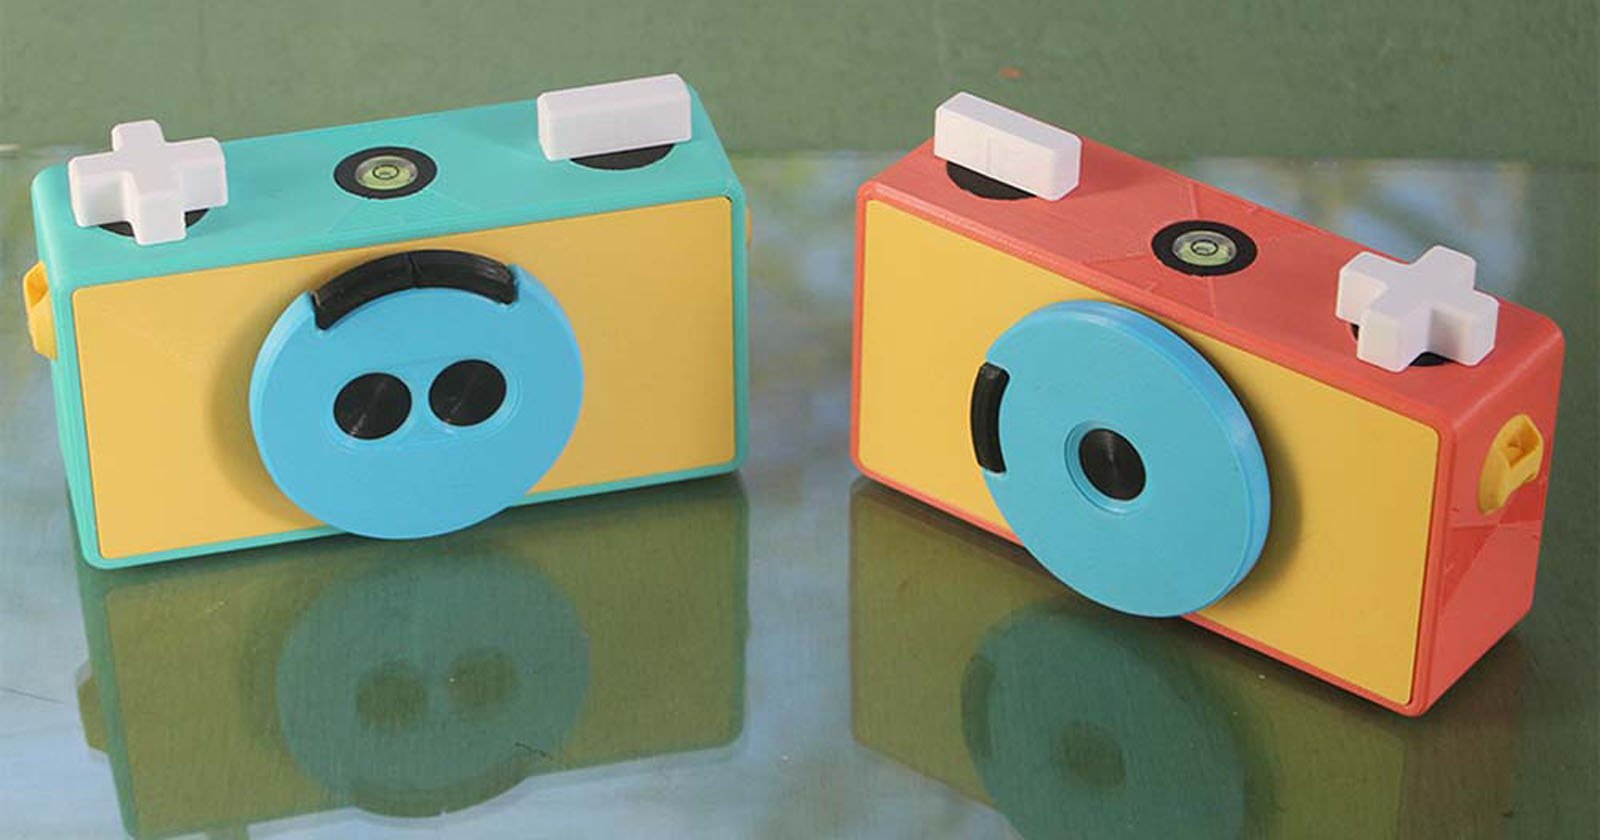 This Modular Pinhole Camera Is Colorful and Environmentally-Friendly